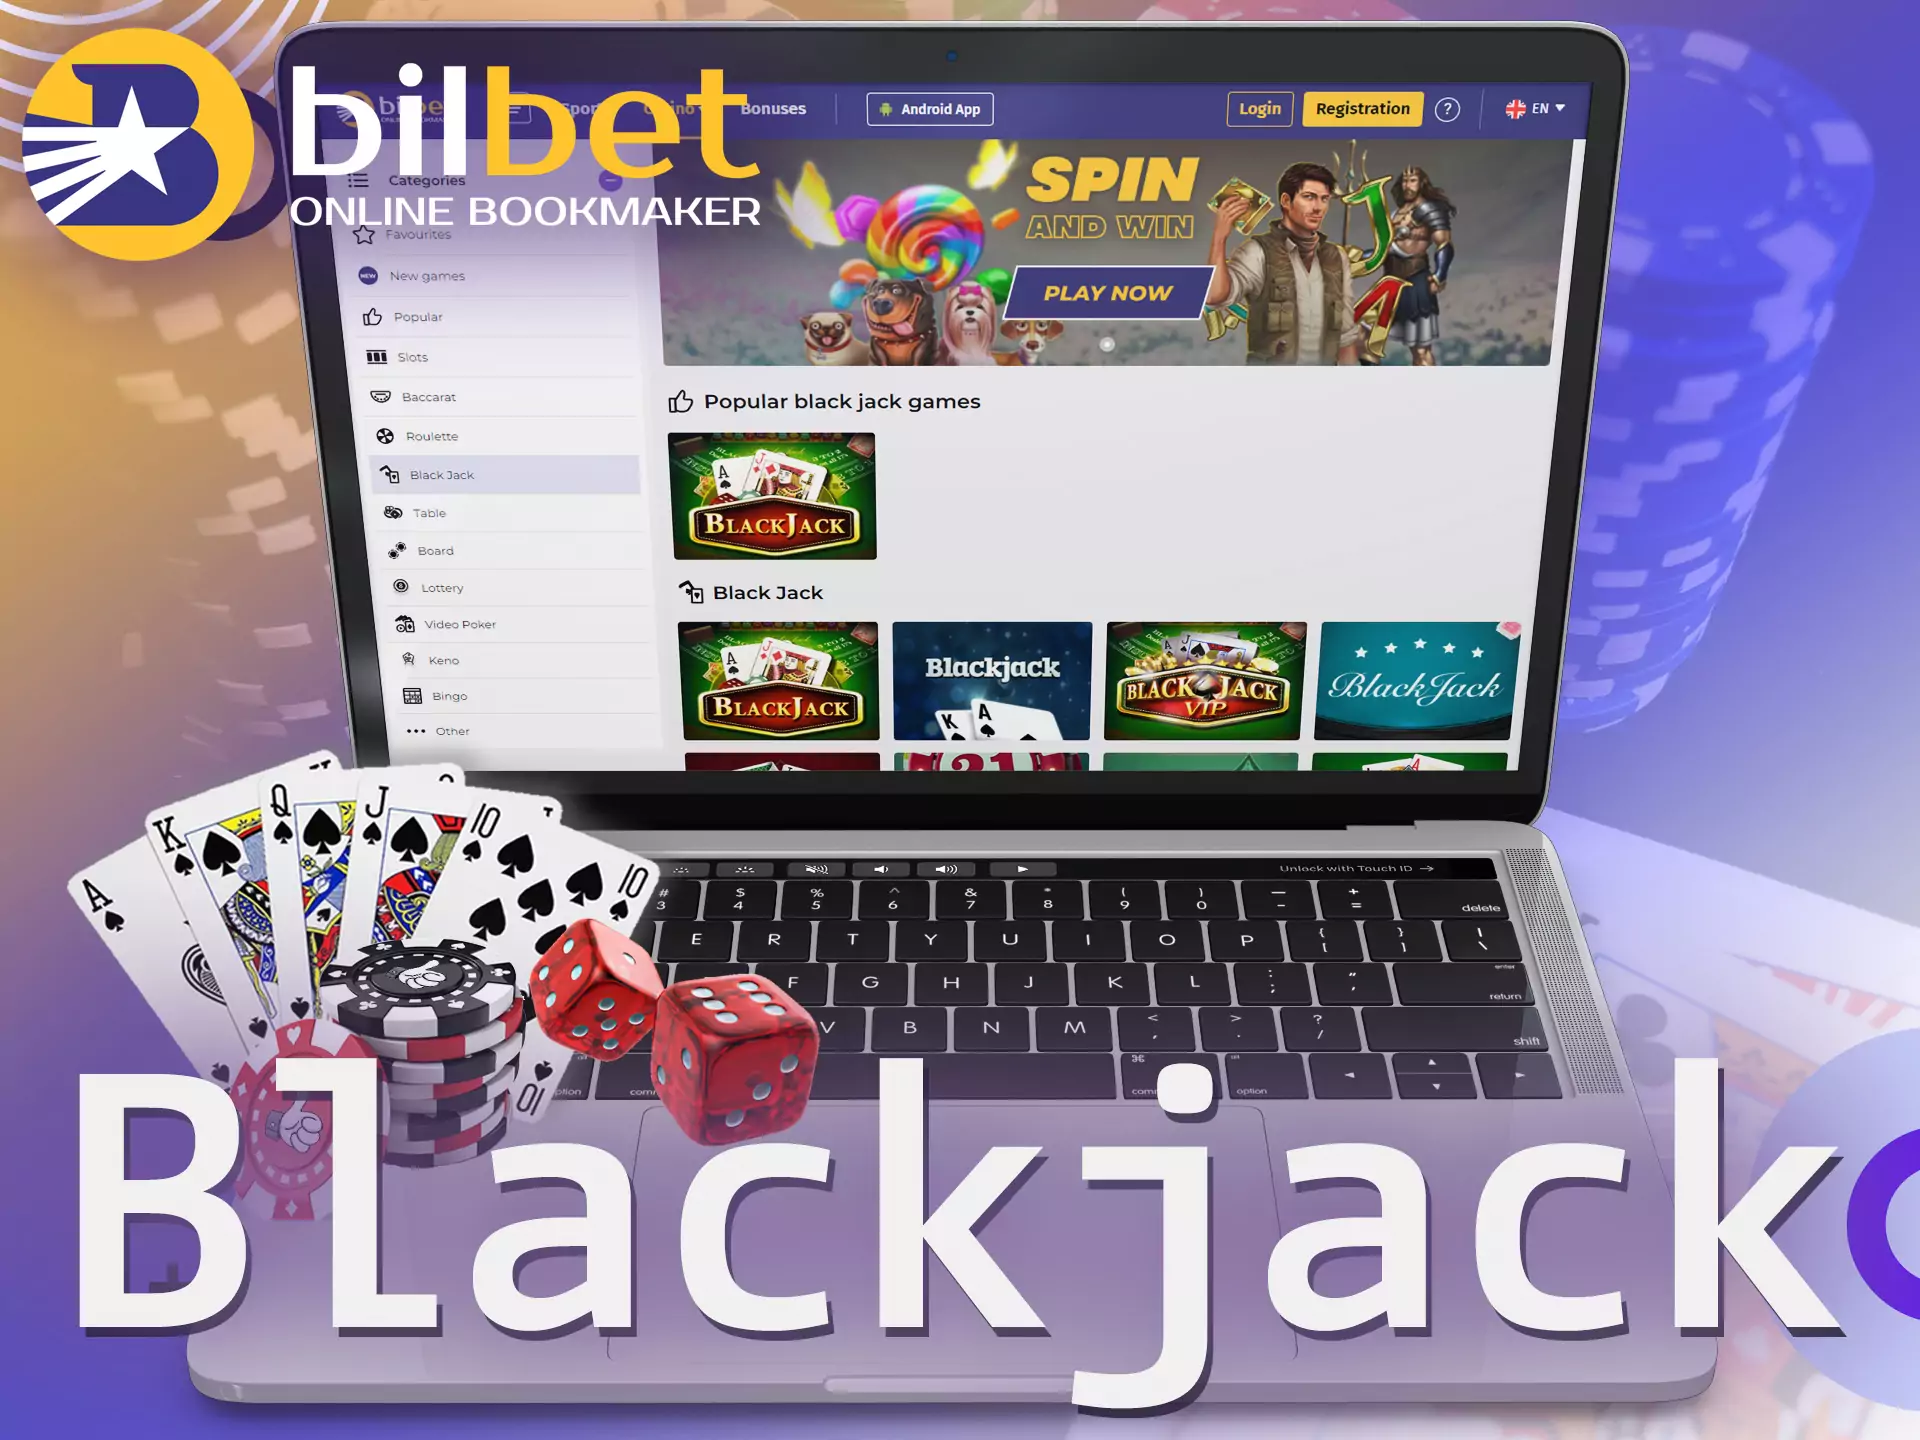 The game of blackjack is widely popular among Bilbet players.